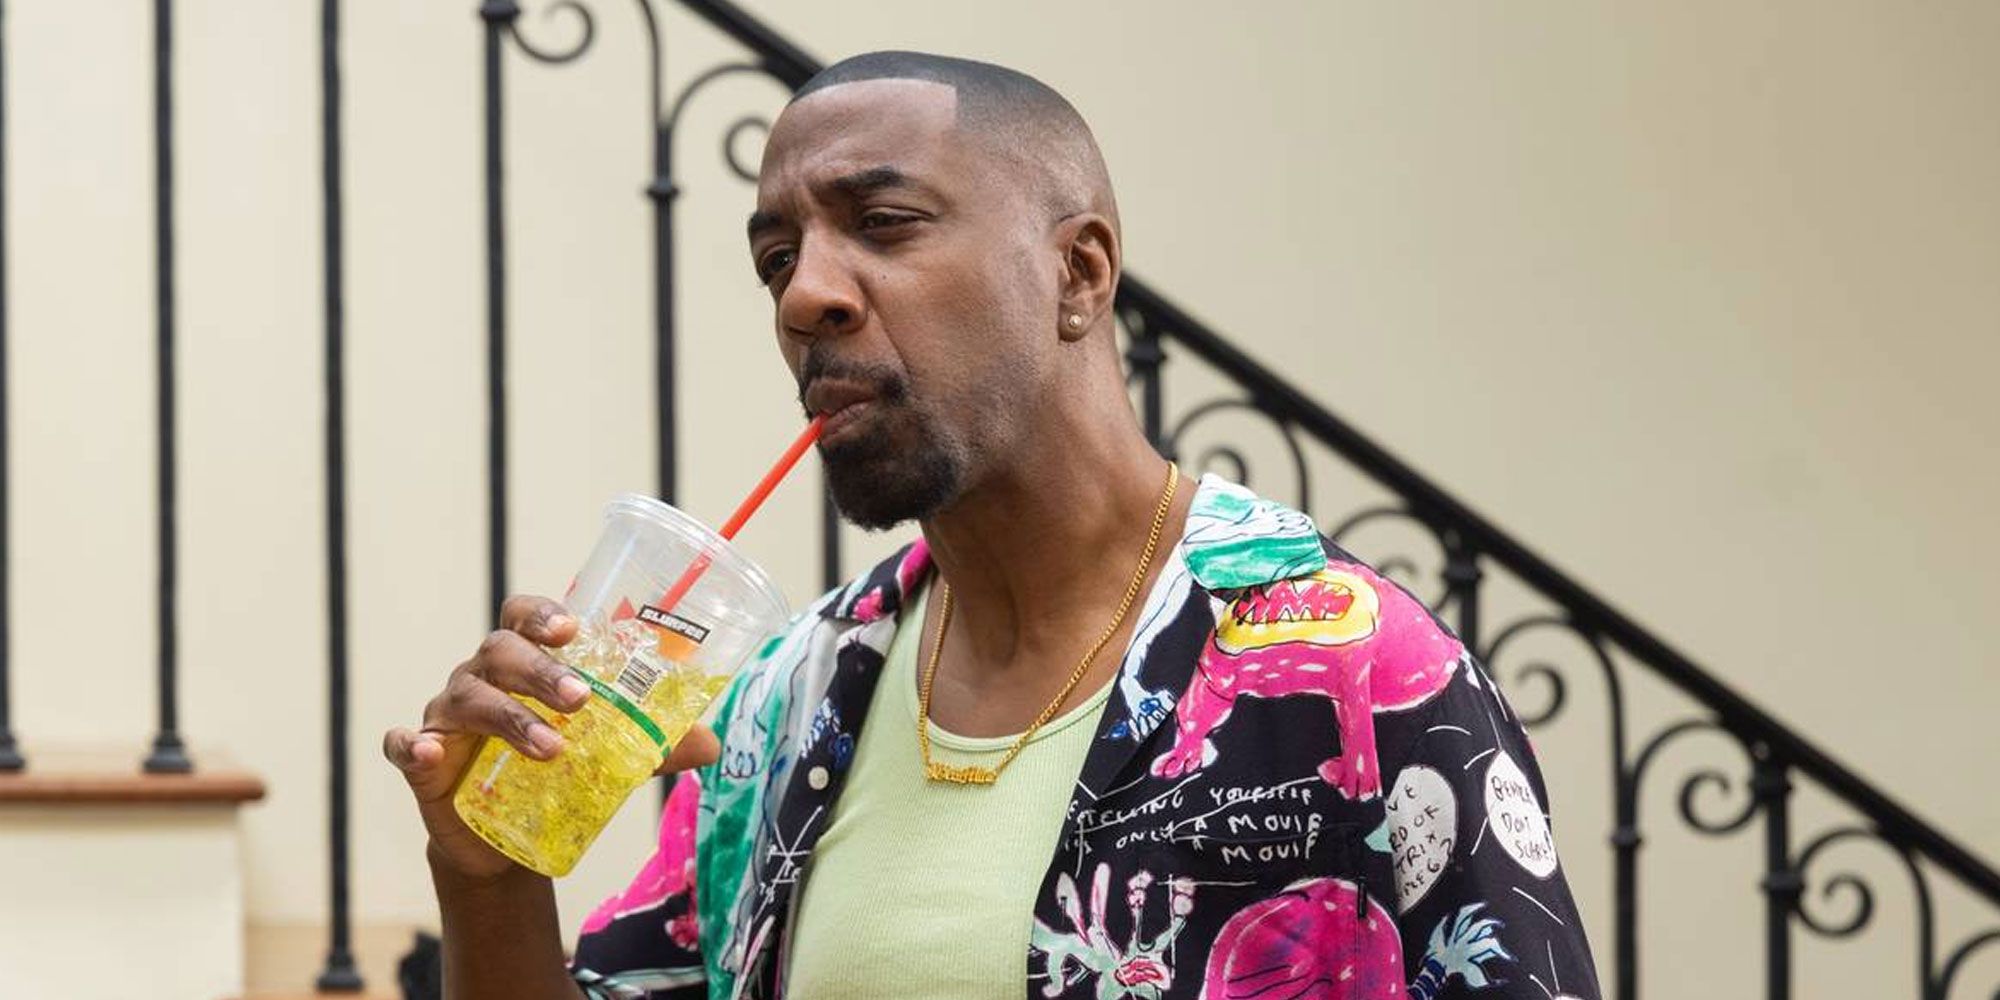 JB Smoove drinking from a plastic cup